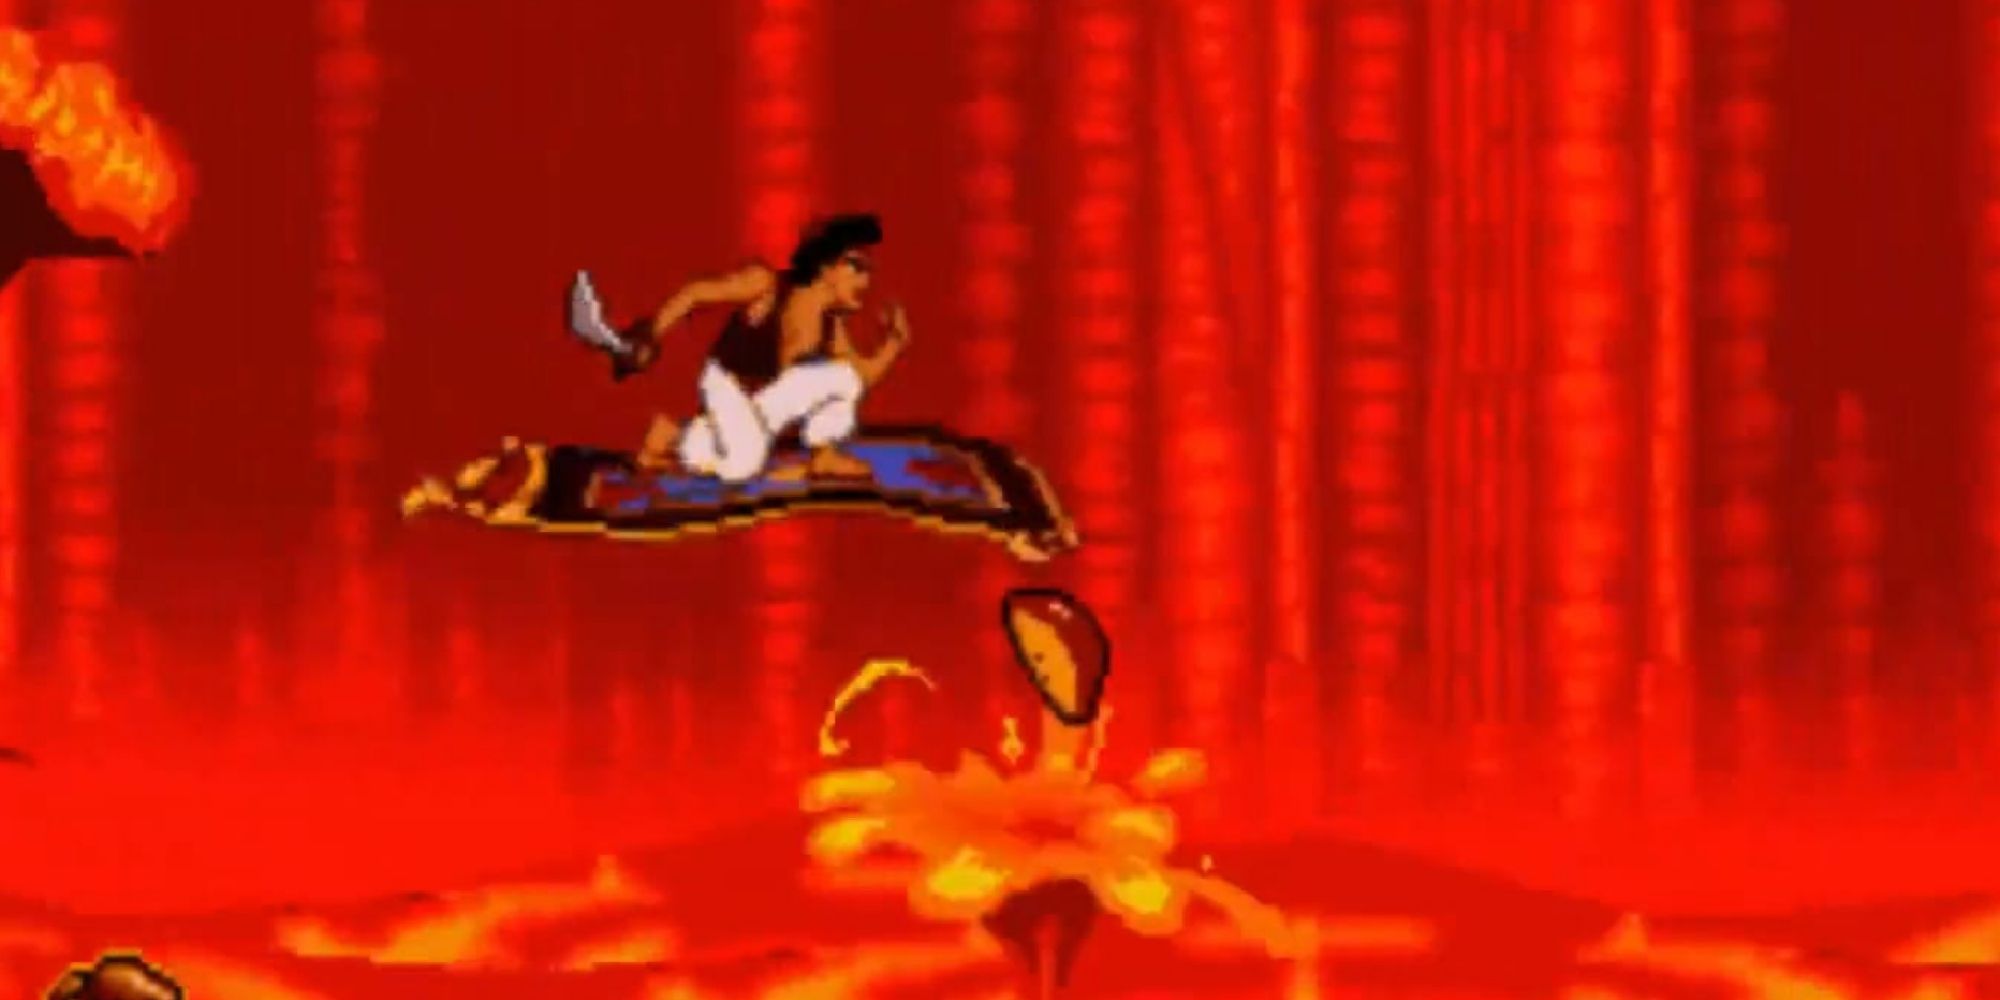 Aladdin rides his magic carpet through a lava-filled Cave of Wonders in Aladdin for the Genesis